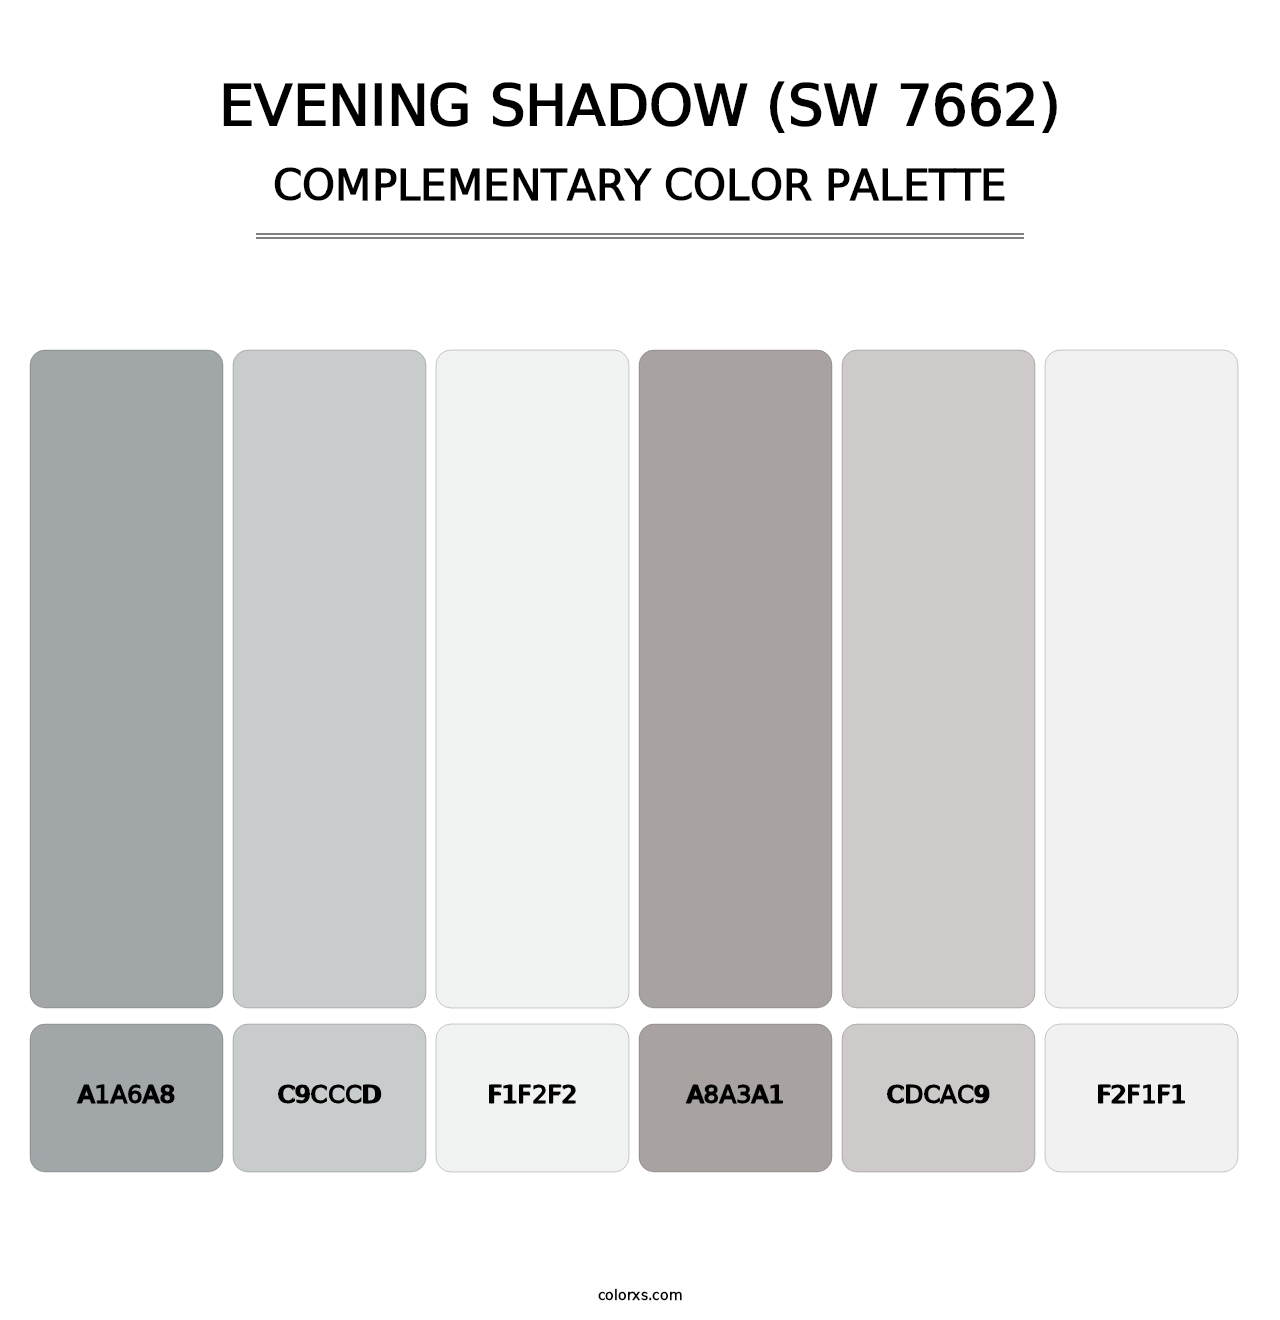 Evening Shadow (SW 7662) - Complementary Color Palette